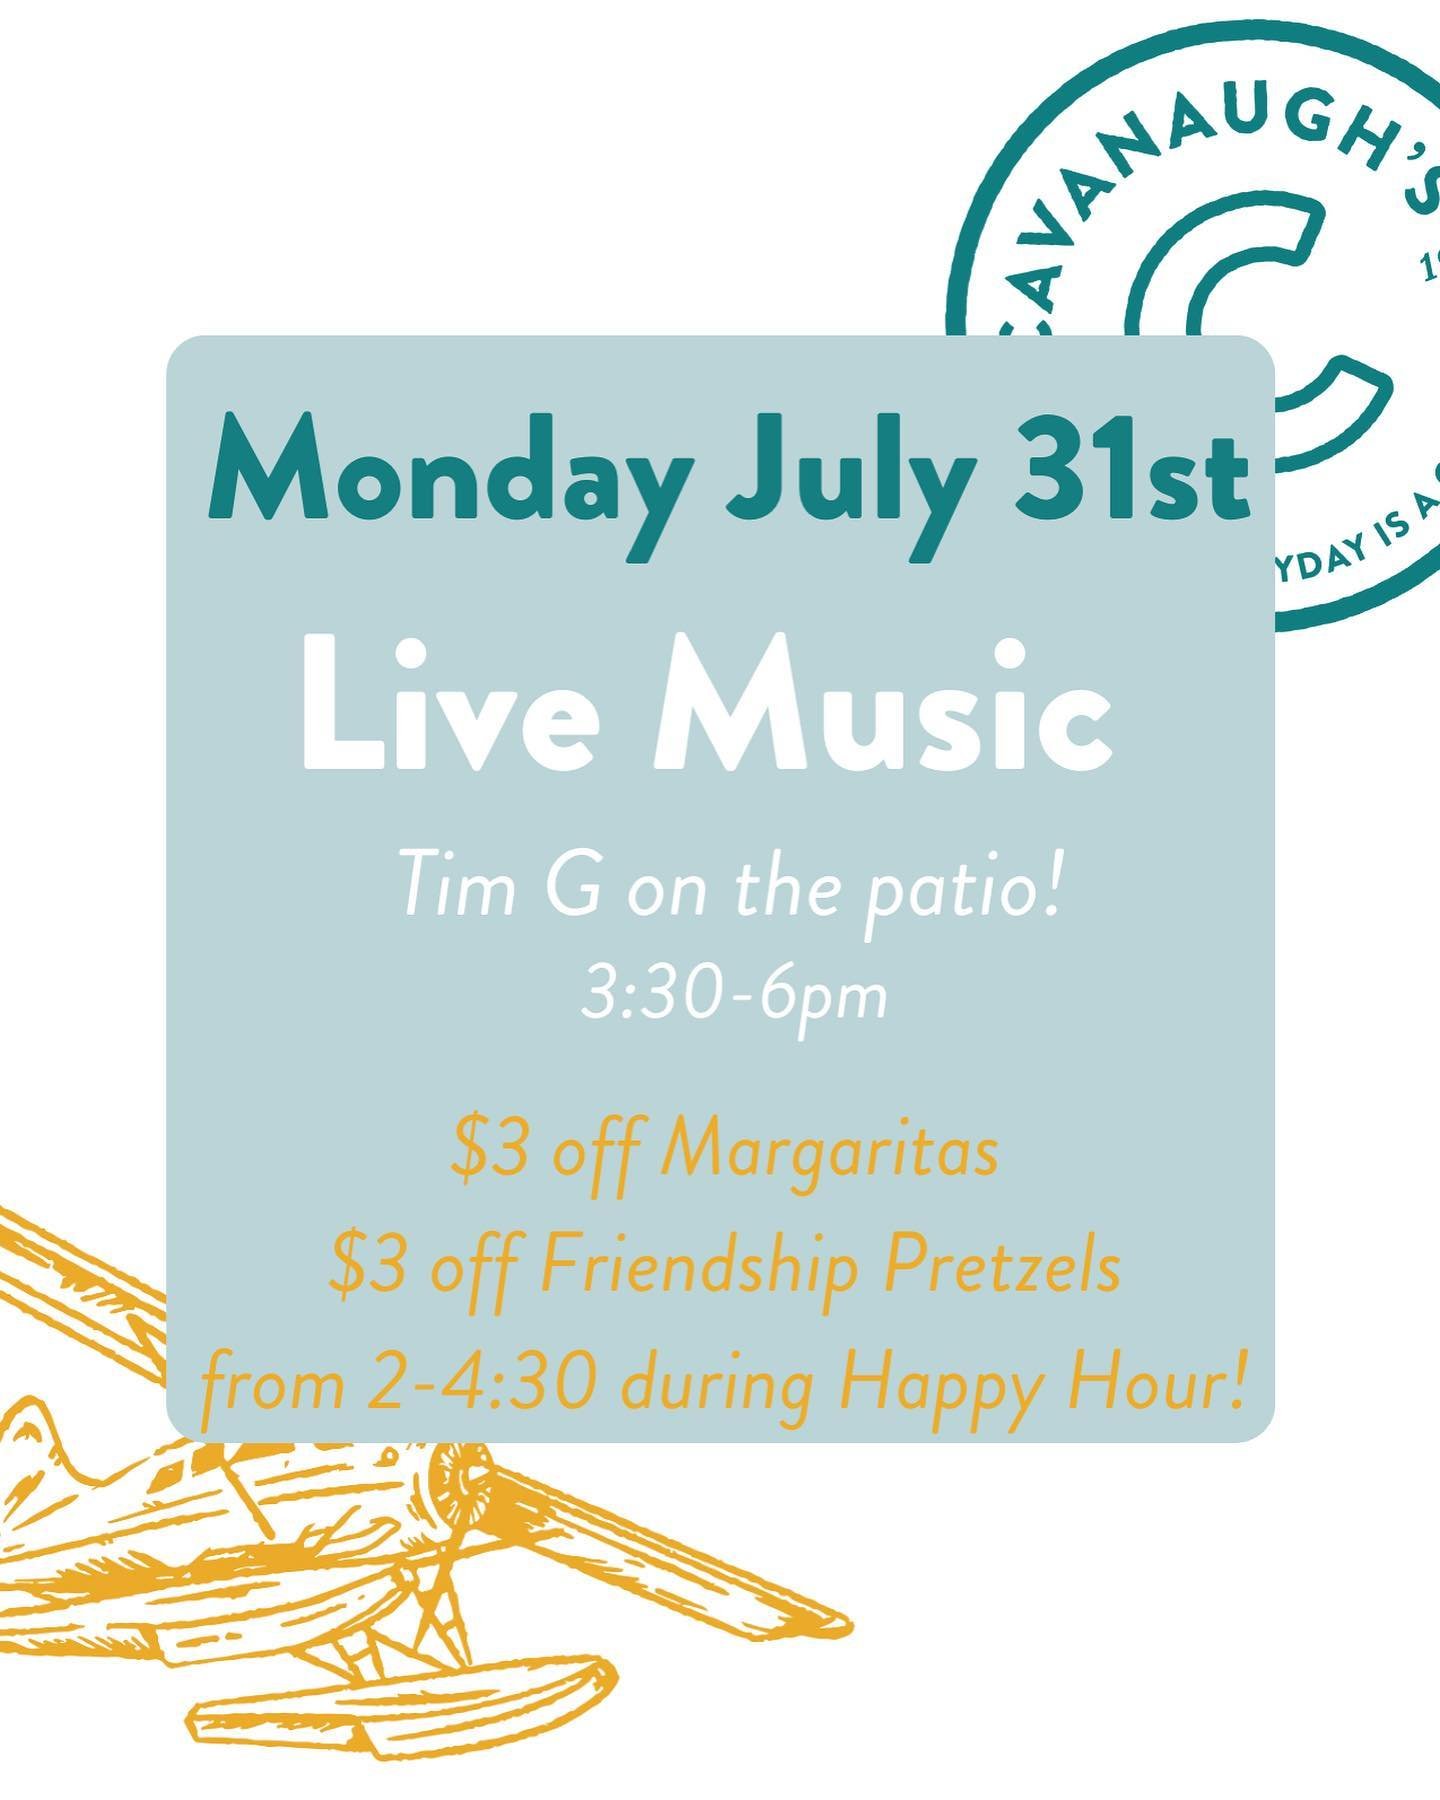 Closing out the month of July with Tim G on the patio from 3:30-6pm! 

Enjoy our Monday Happy Hour specials from 2-4:30pm! 

Cheers 🎶